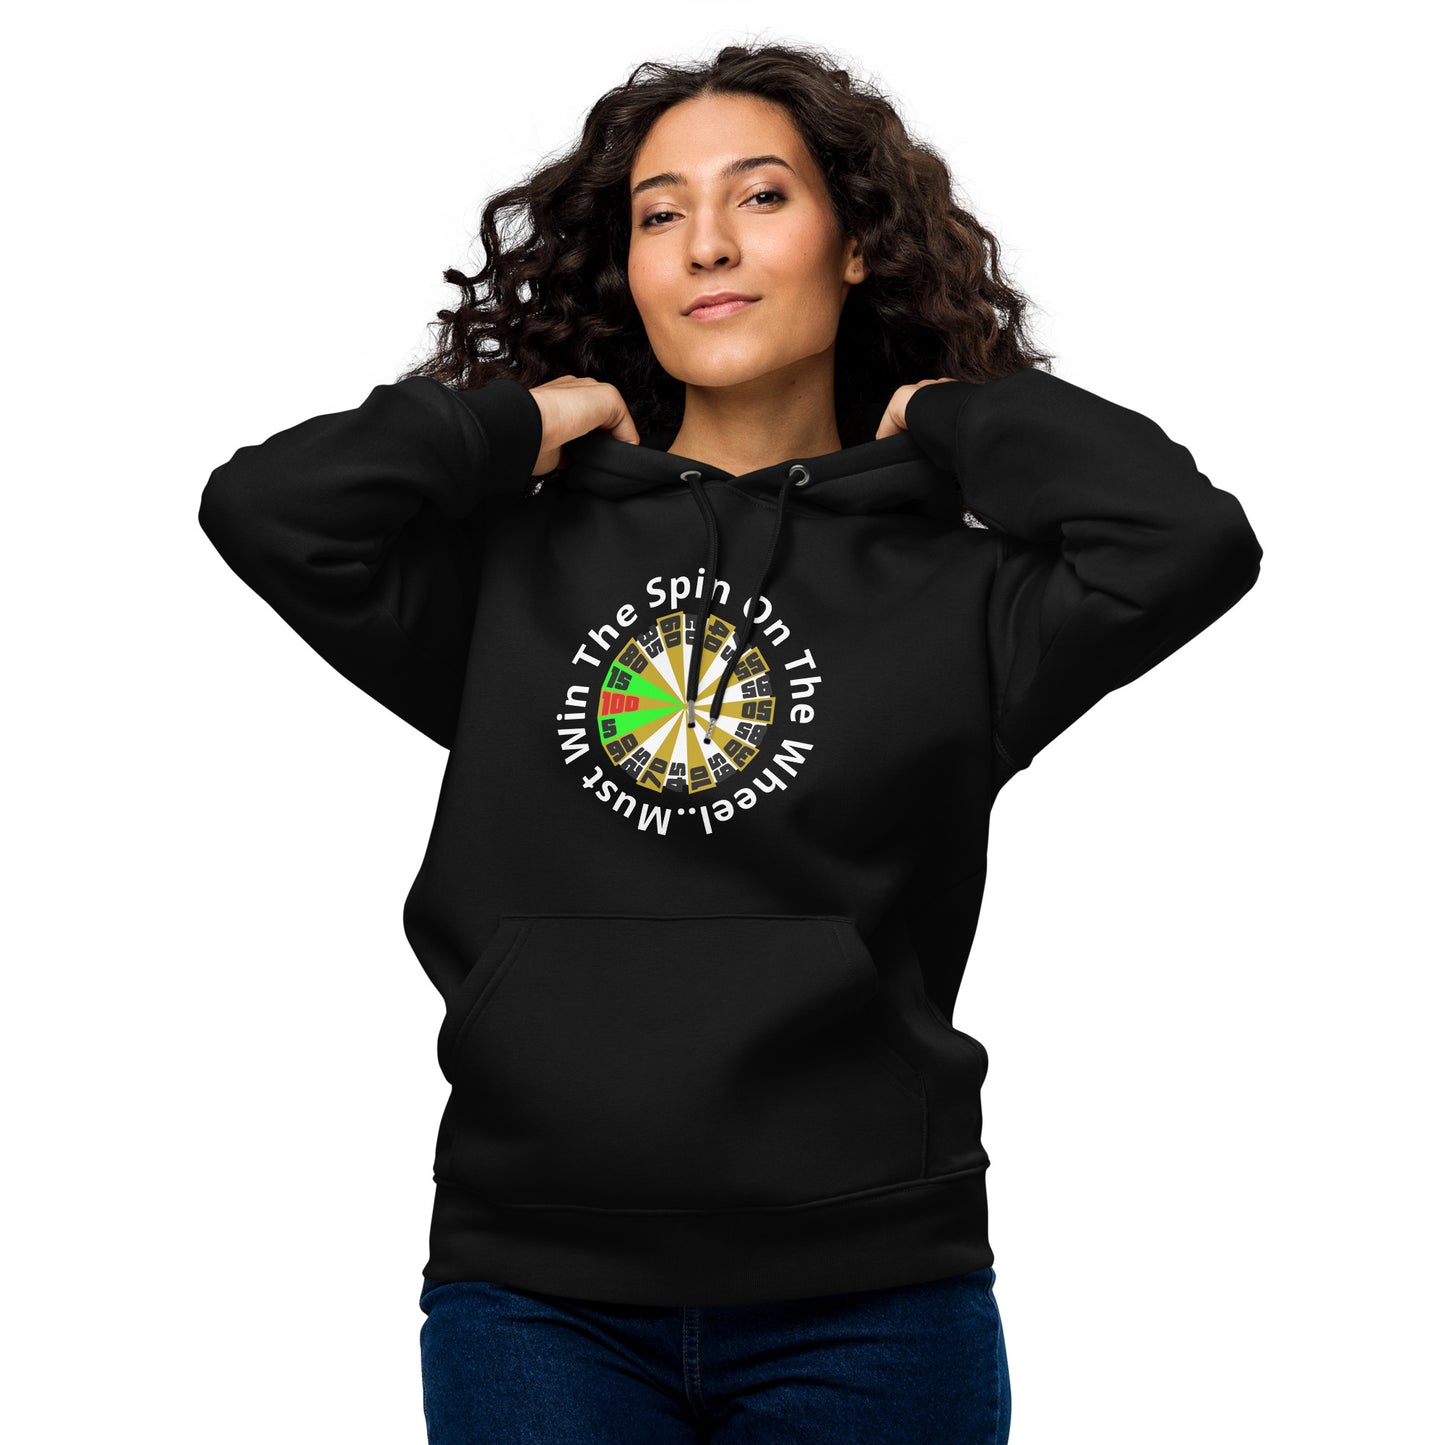 Unisex essential eco hoodie - The Price Is Right - Spin The Wheel on Front - Greeting to Family & Friends on Back